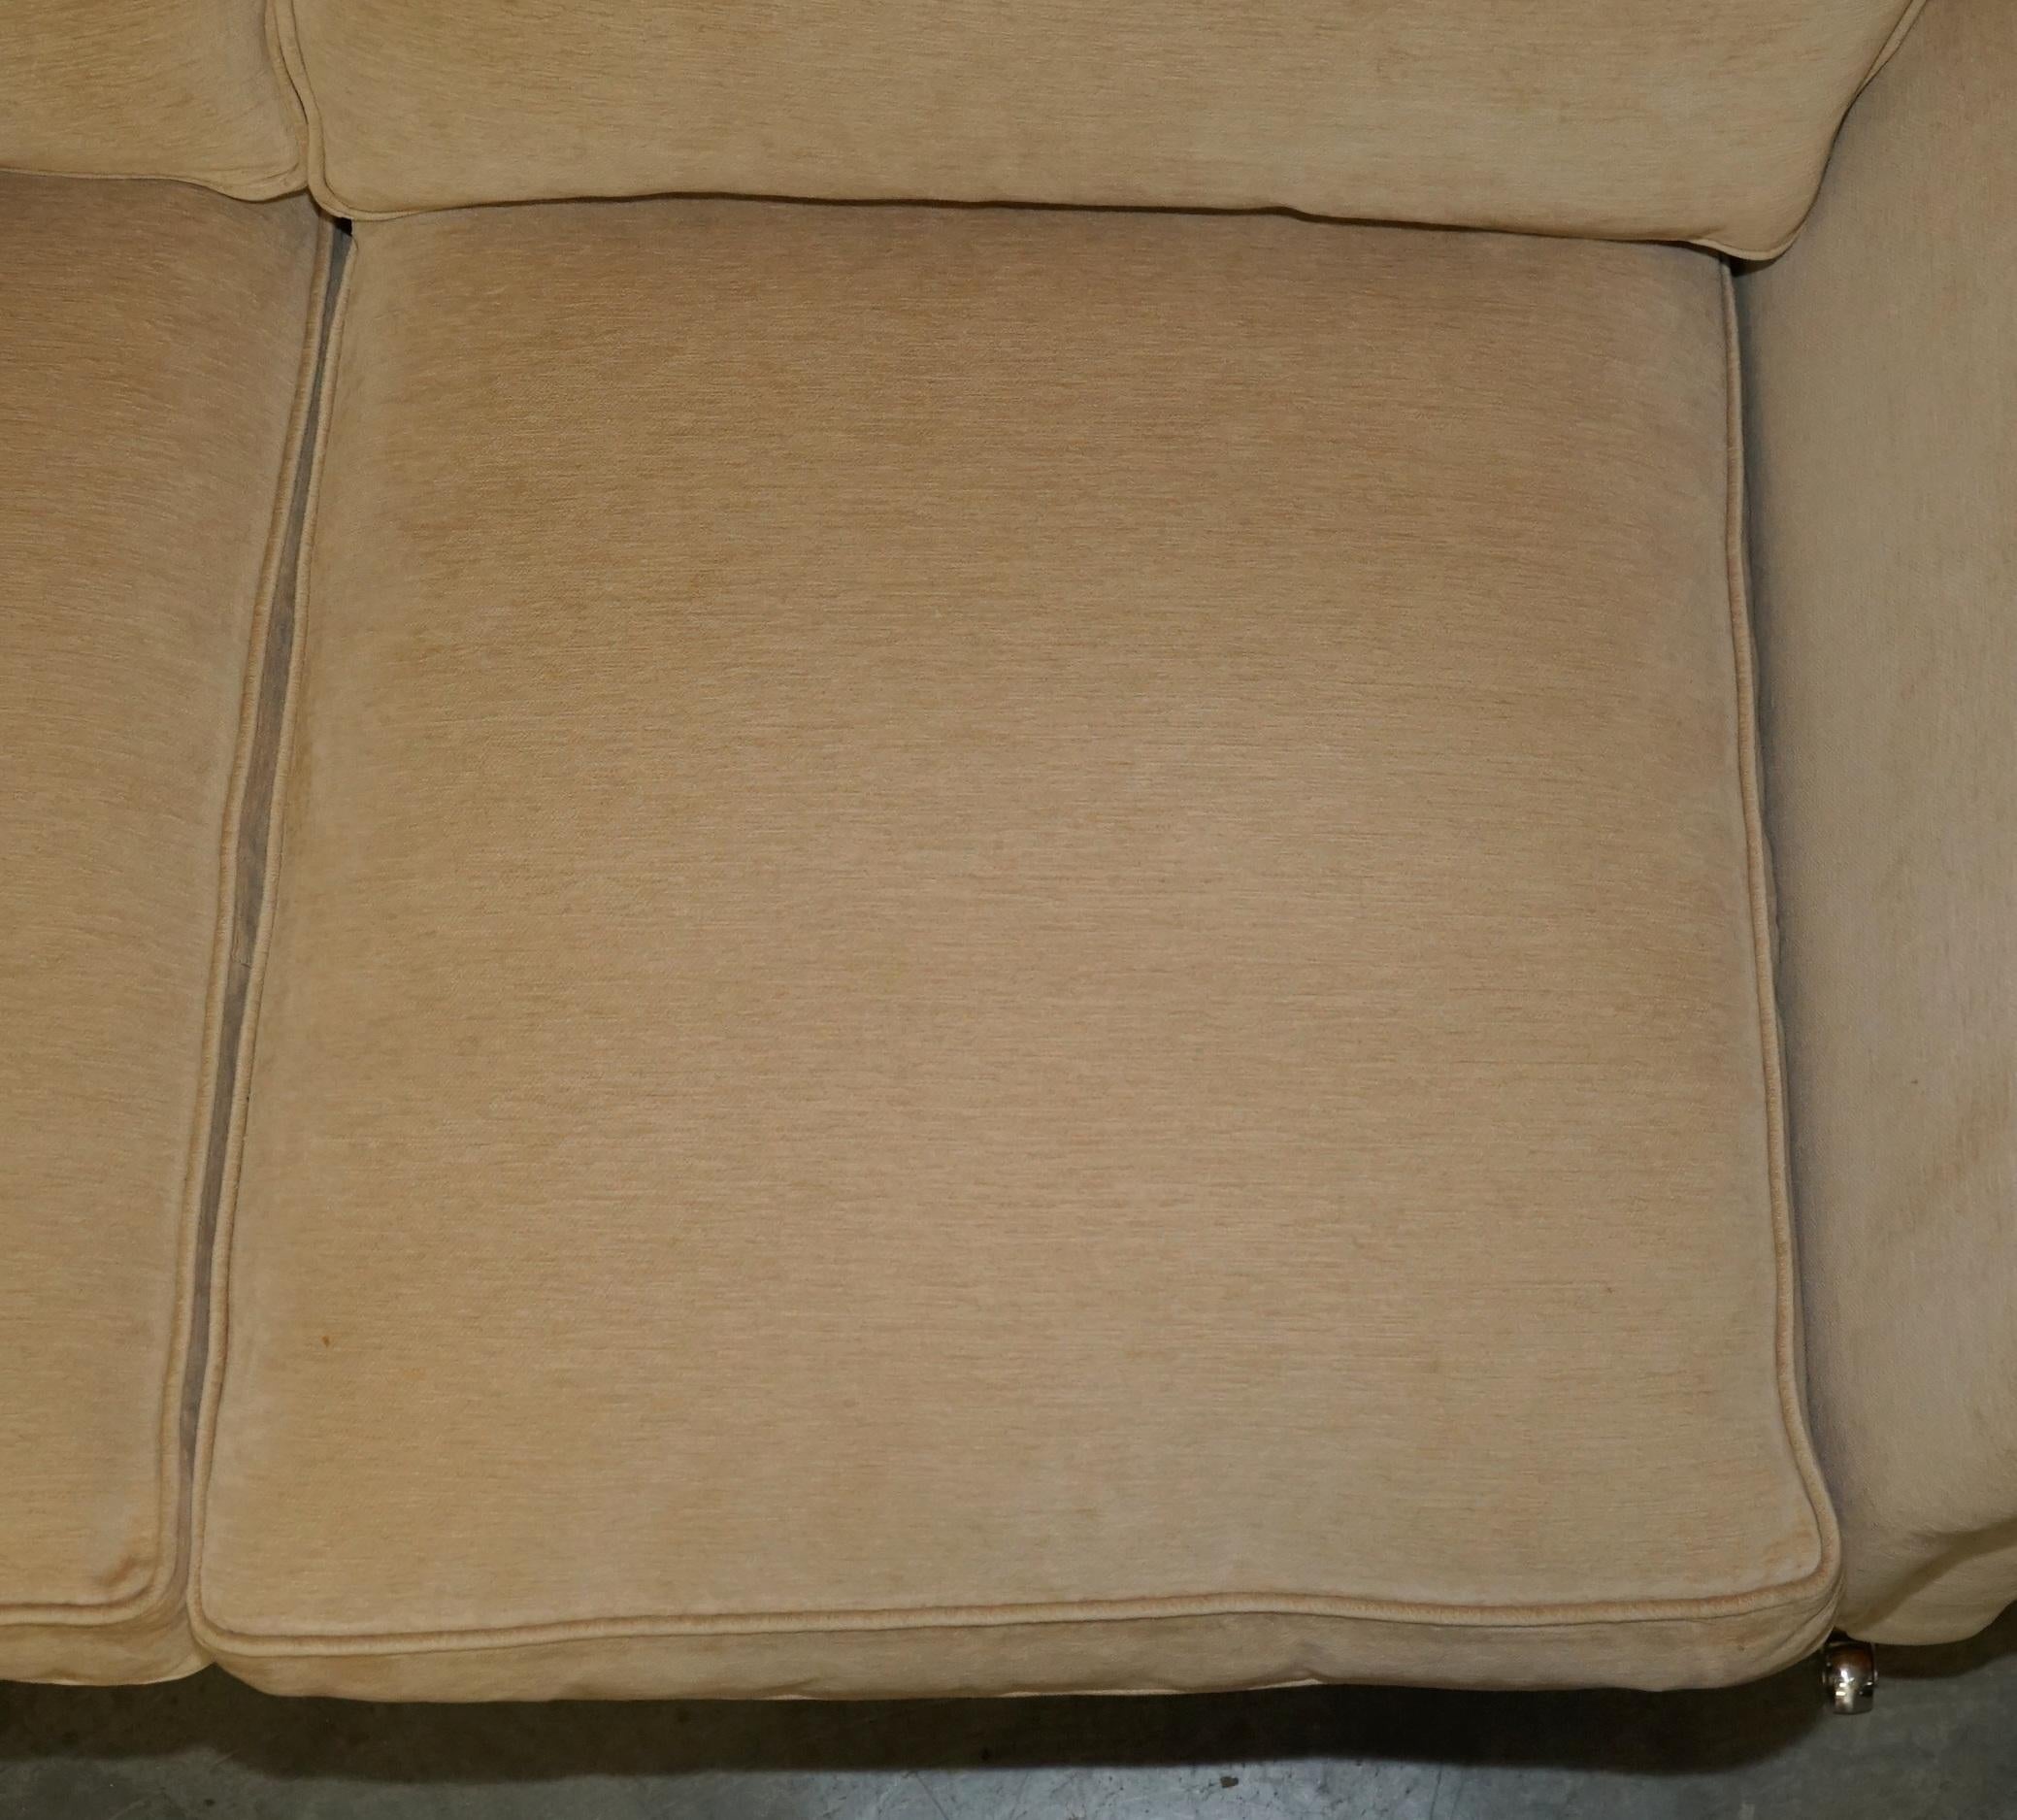 EXQUISITE VISCOUNT DAVID LINLEY TWO SEAT SOFA WiTH STAMPED CASTORS For Sale 5